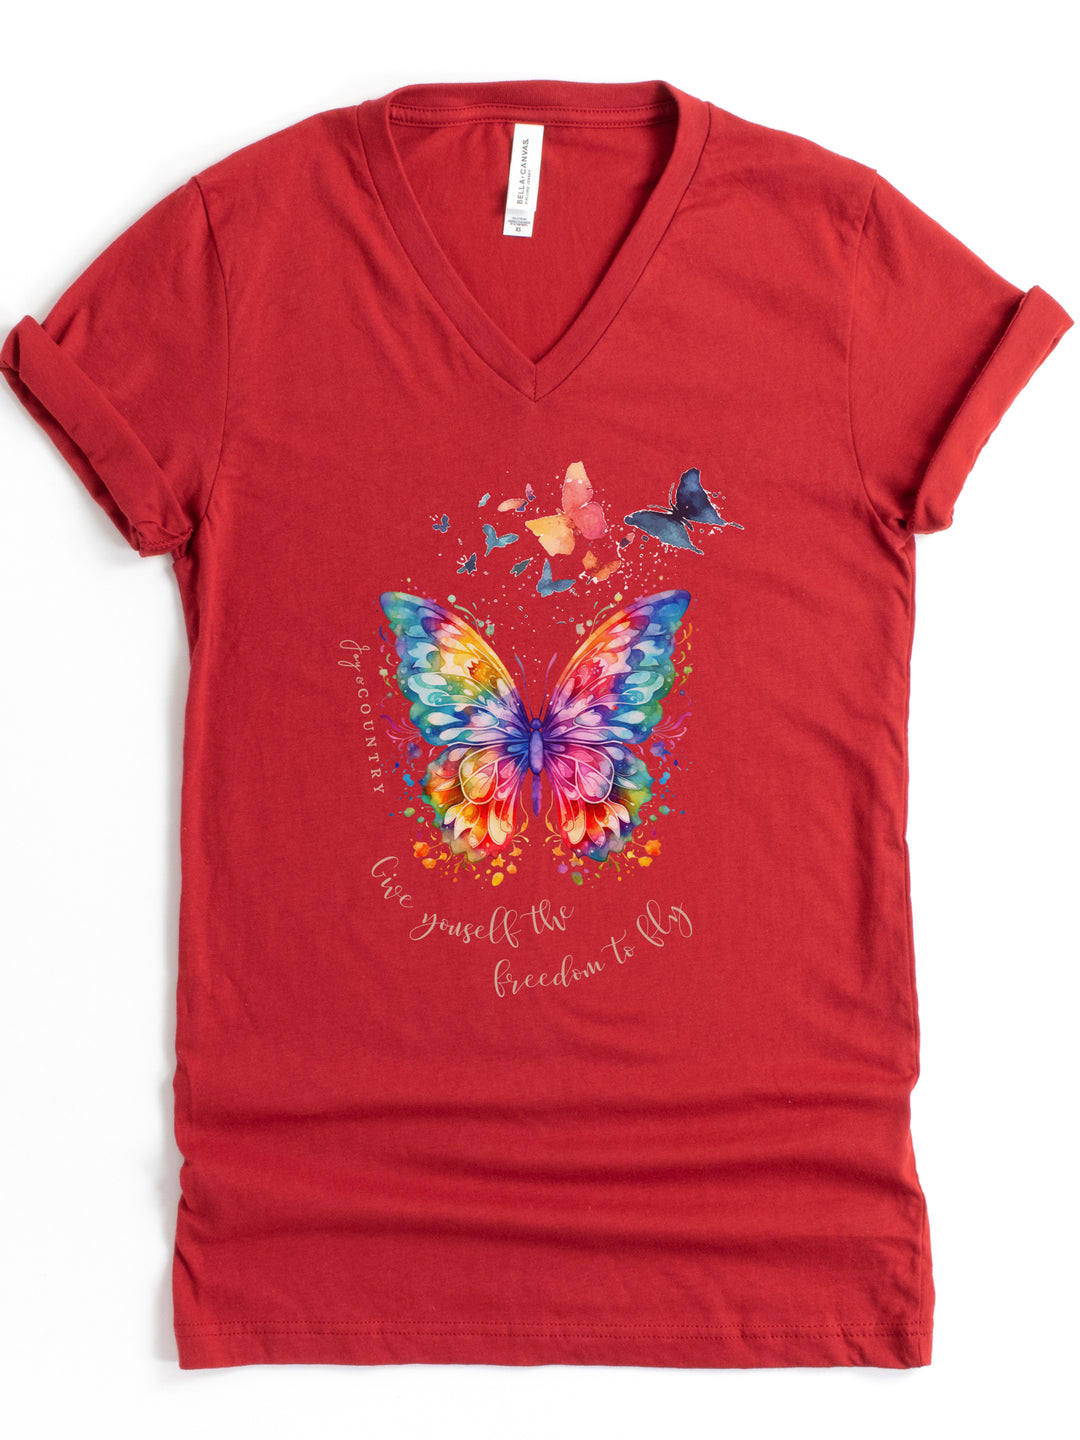 Give Yourself The Freedom To Fly - Butterflies - Unisex V-Neck Tee